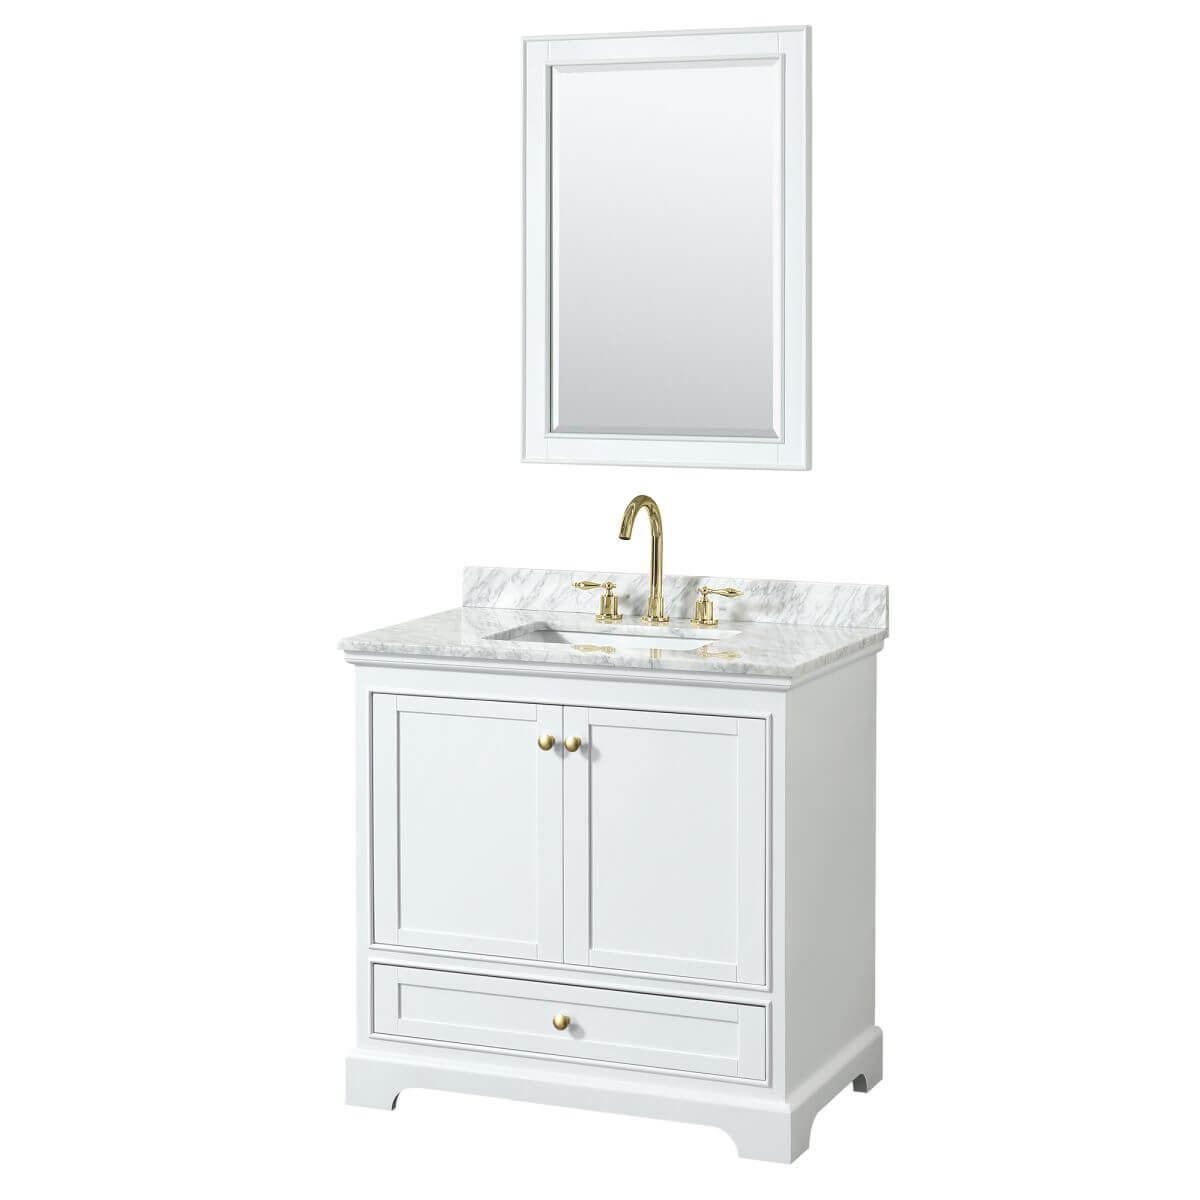 Wyndham Collection Deborah 36 inch Single Bathroom Vanity in White with White Carrara Marble Countertop, Undermount Square Sink, Brushed Gold Trim and 24 inch Mirror - WCS202036SWGCMUNSM24